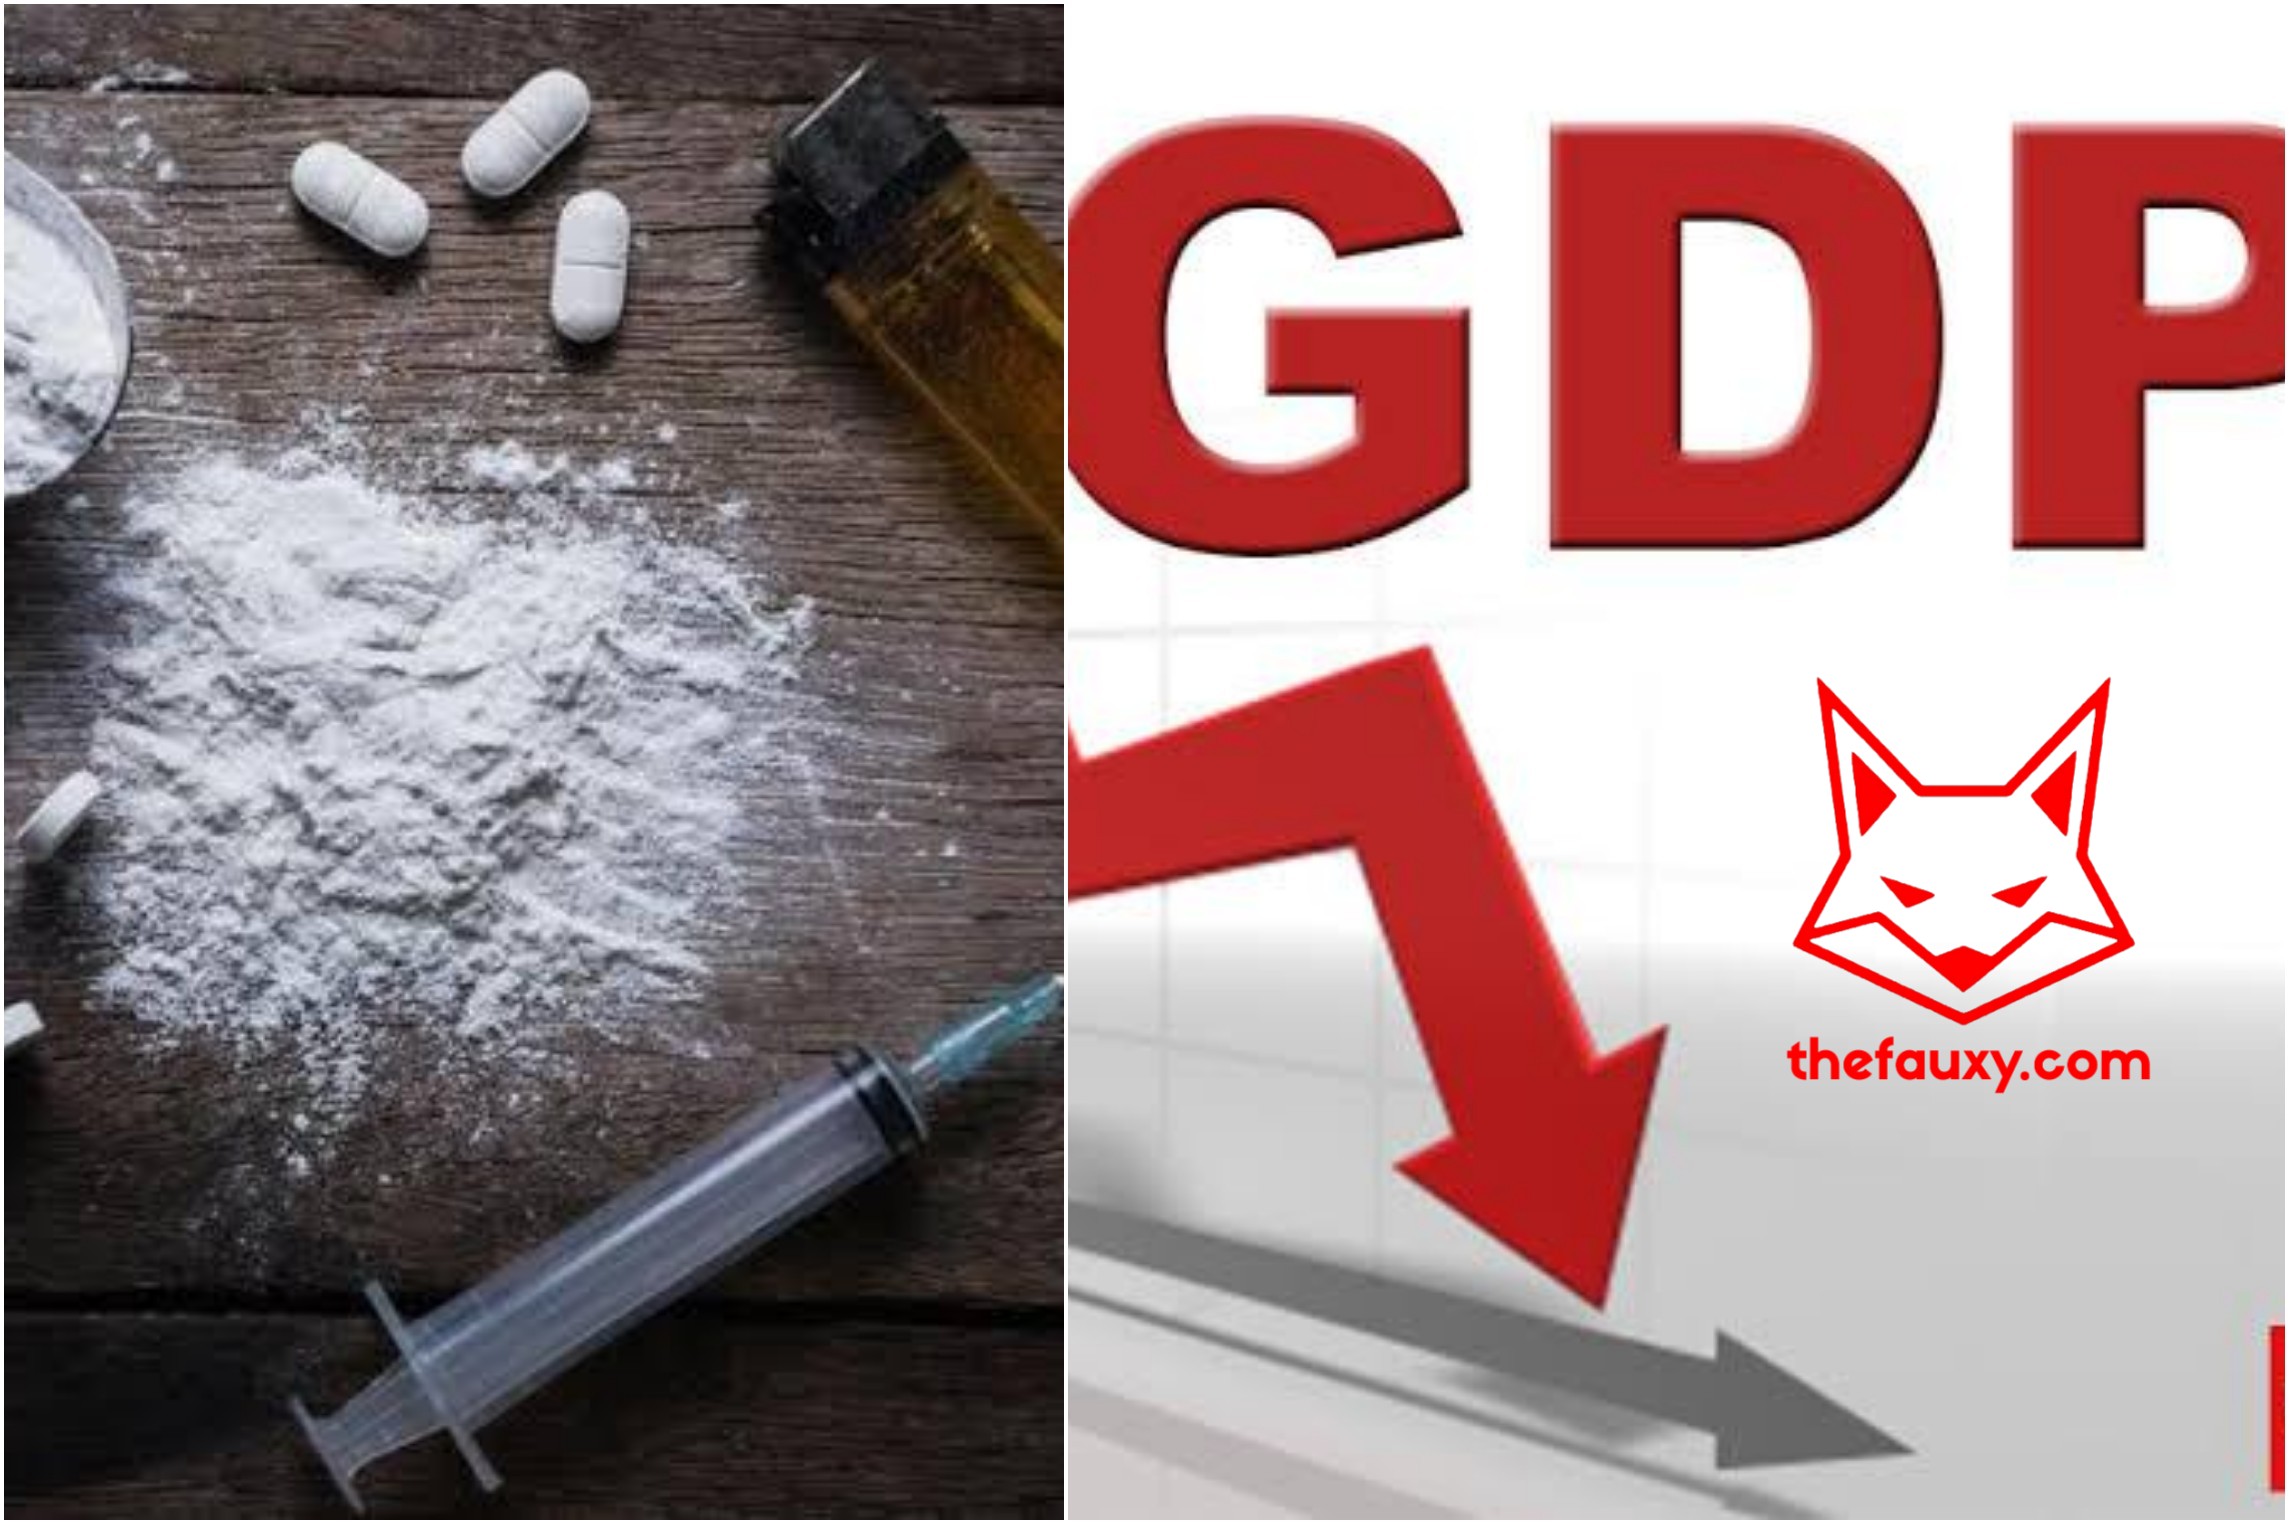 Removing Drug Cartel and Bollywood Drug Mafias Will Further Reduce India’s GDP: Economists